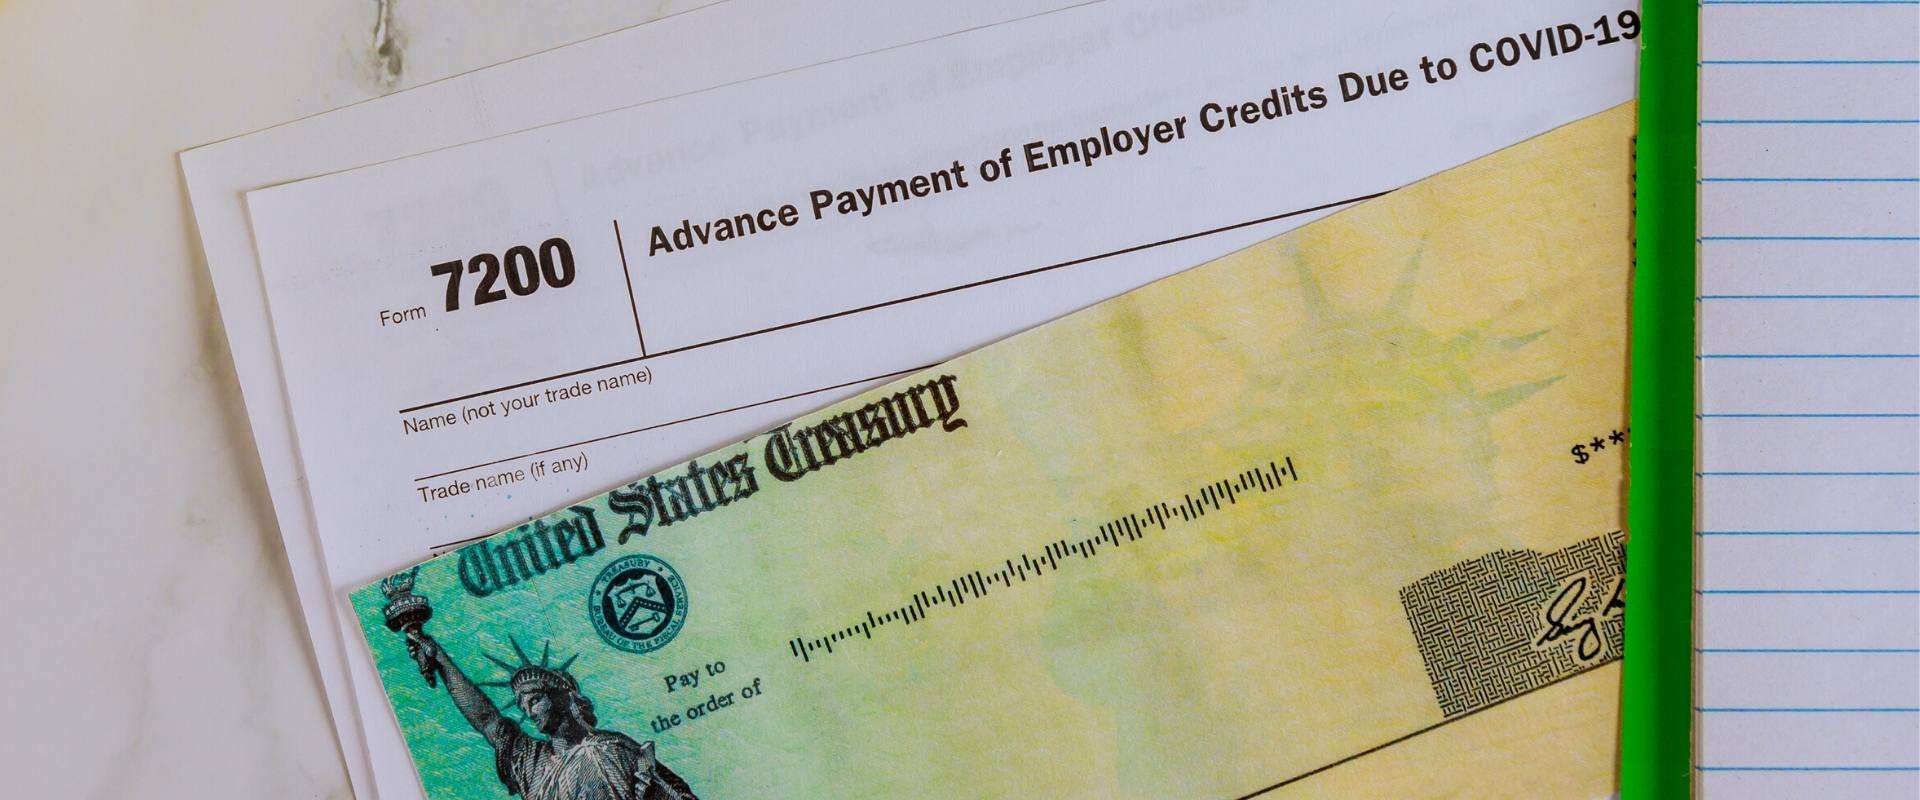 APS Releases Form 7200 Report for COVID-19 Tax Credits